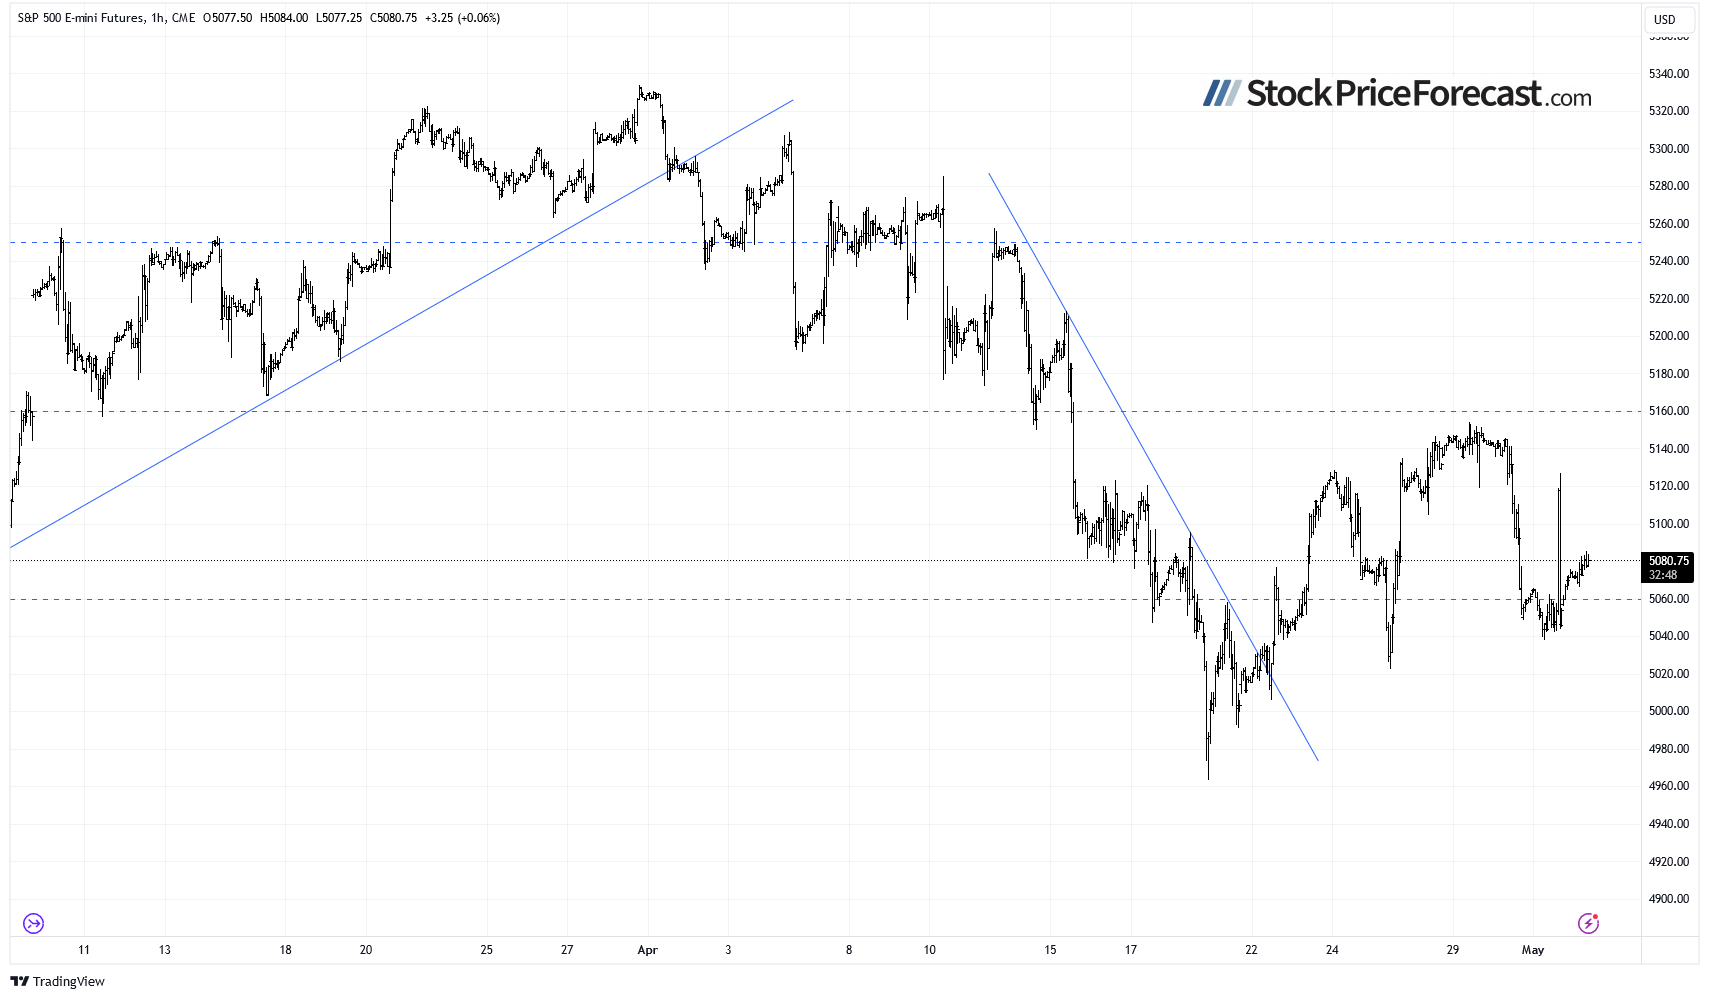 S&P 500 Futures Hourly Chart